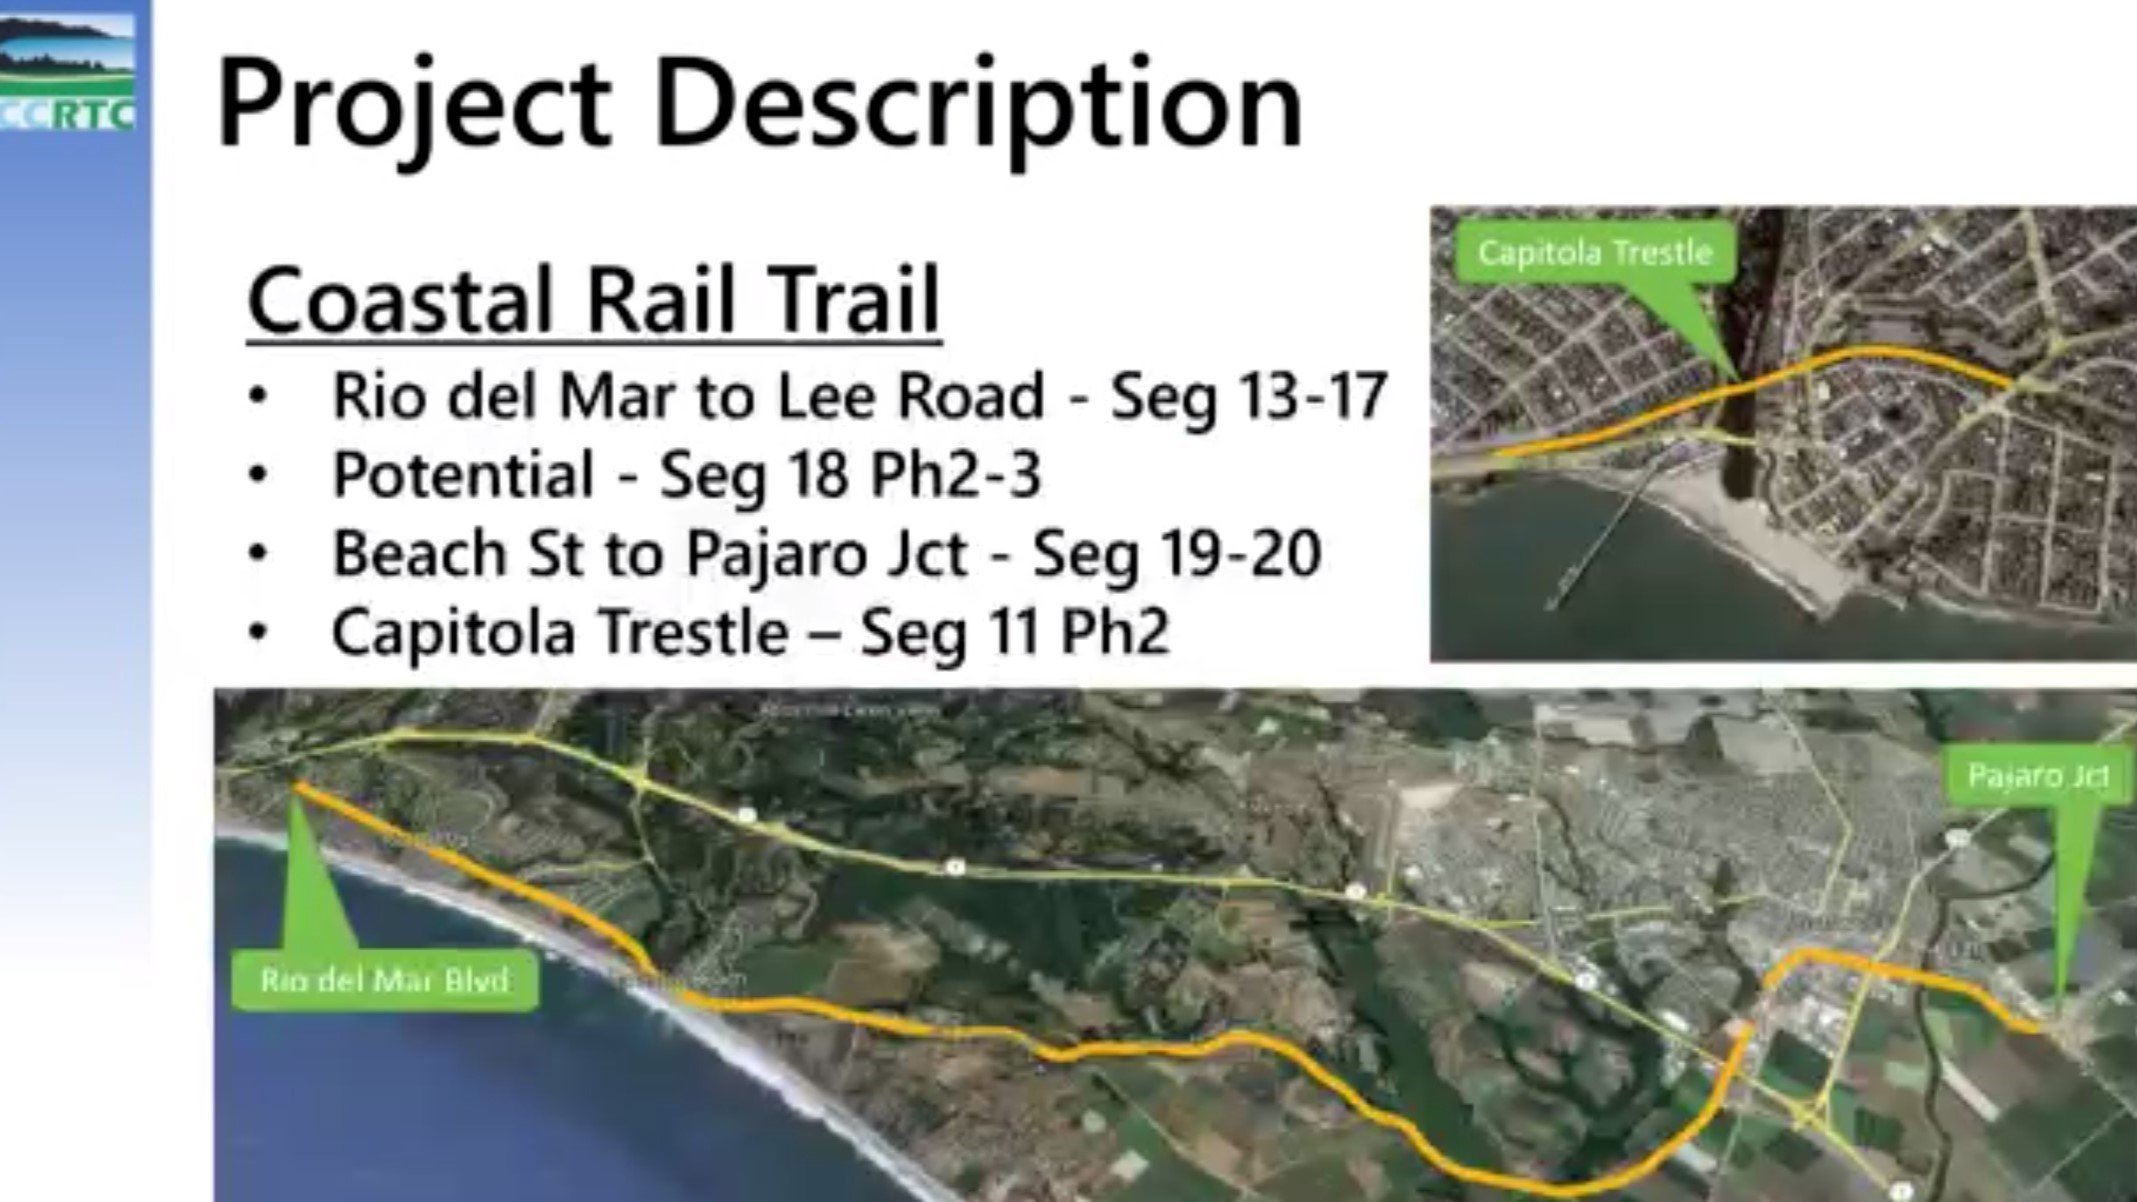 New planning for the Coastal Rail Trail is expected to cover Segments 13 to 20 from Rio Del Mar to Pajaro. (Santa Cruz County Regional Transportation Commission)